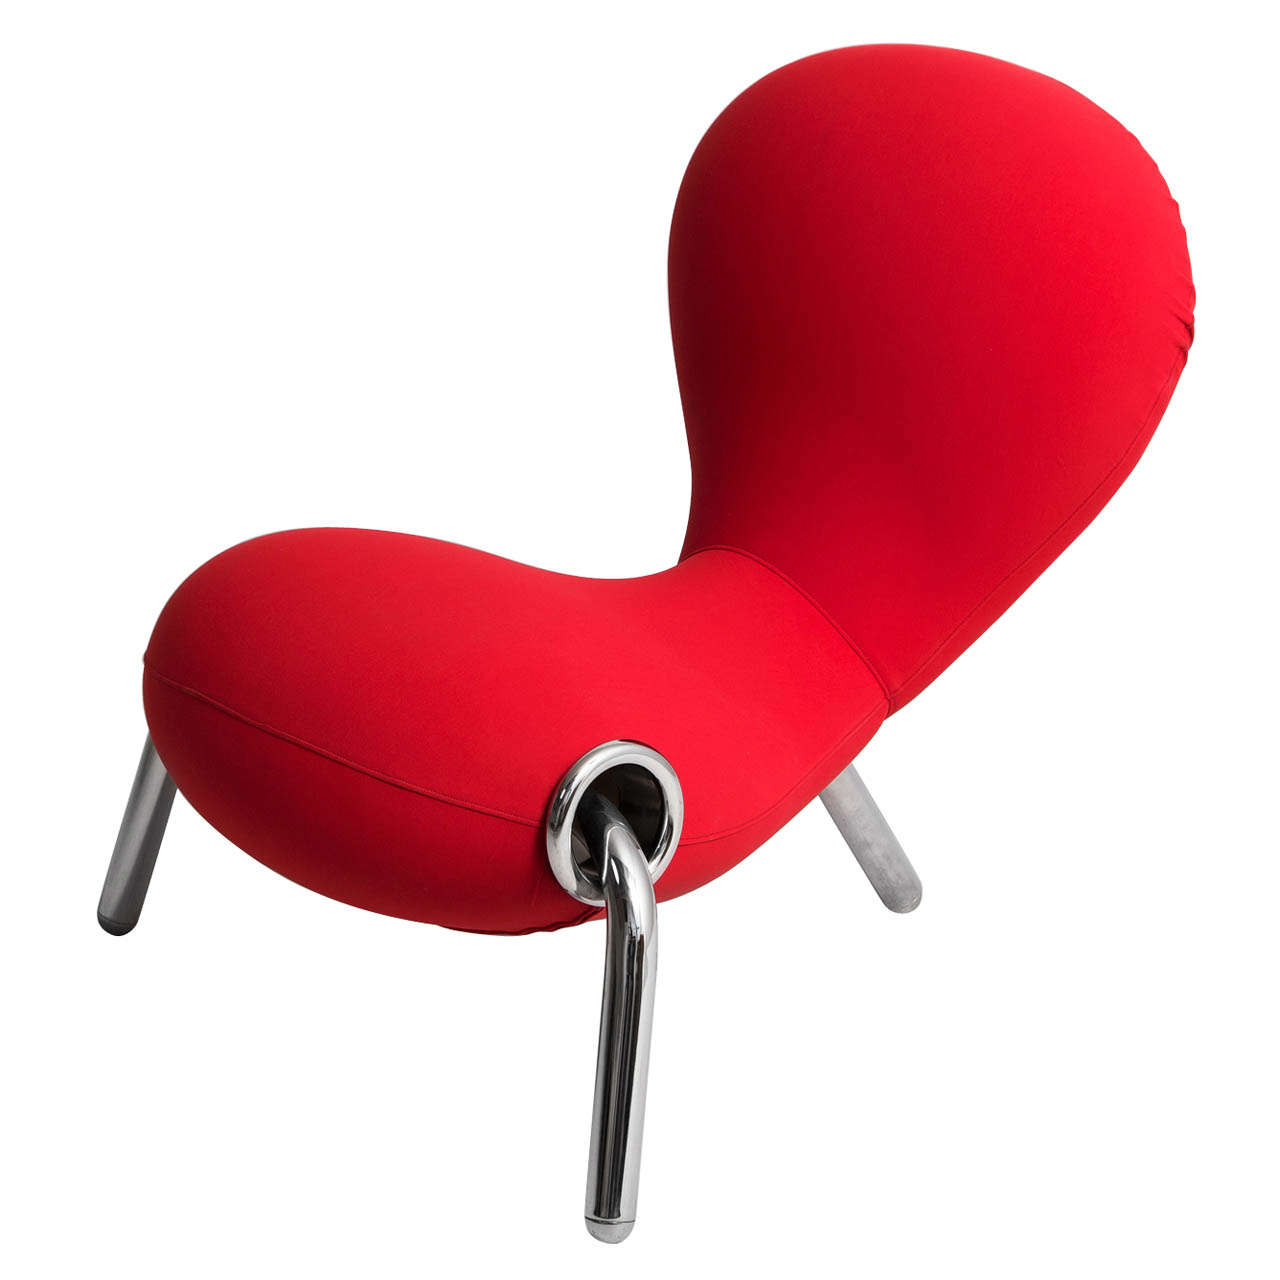 Red "Embryo" Lounge Chair by Marc Newson for Cappellini